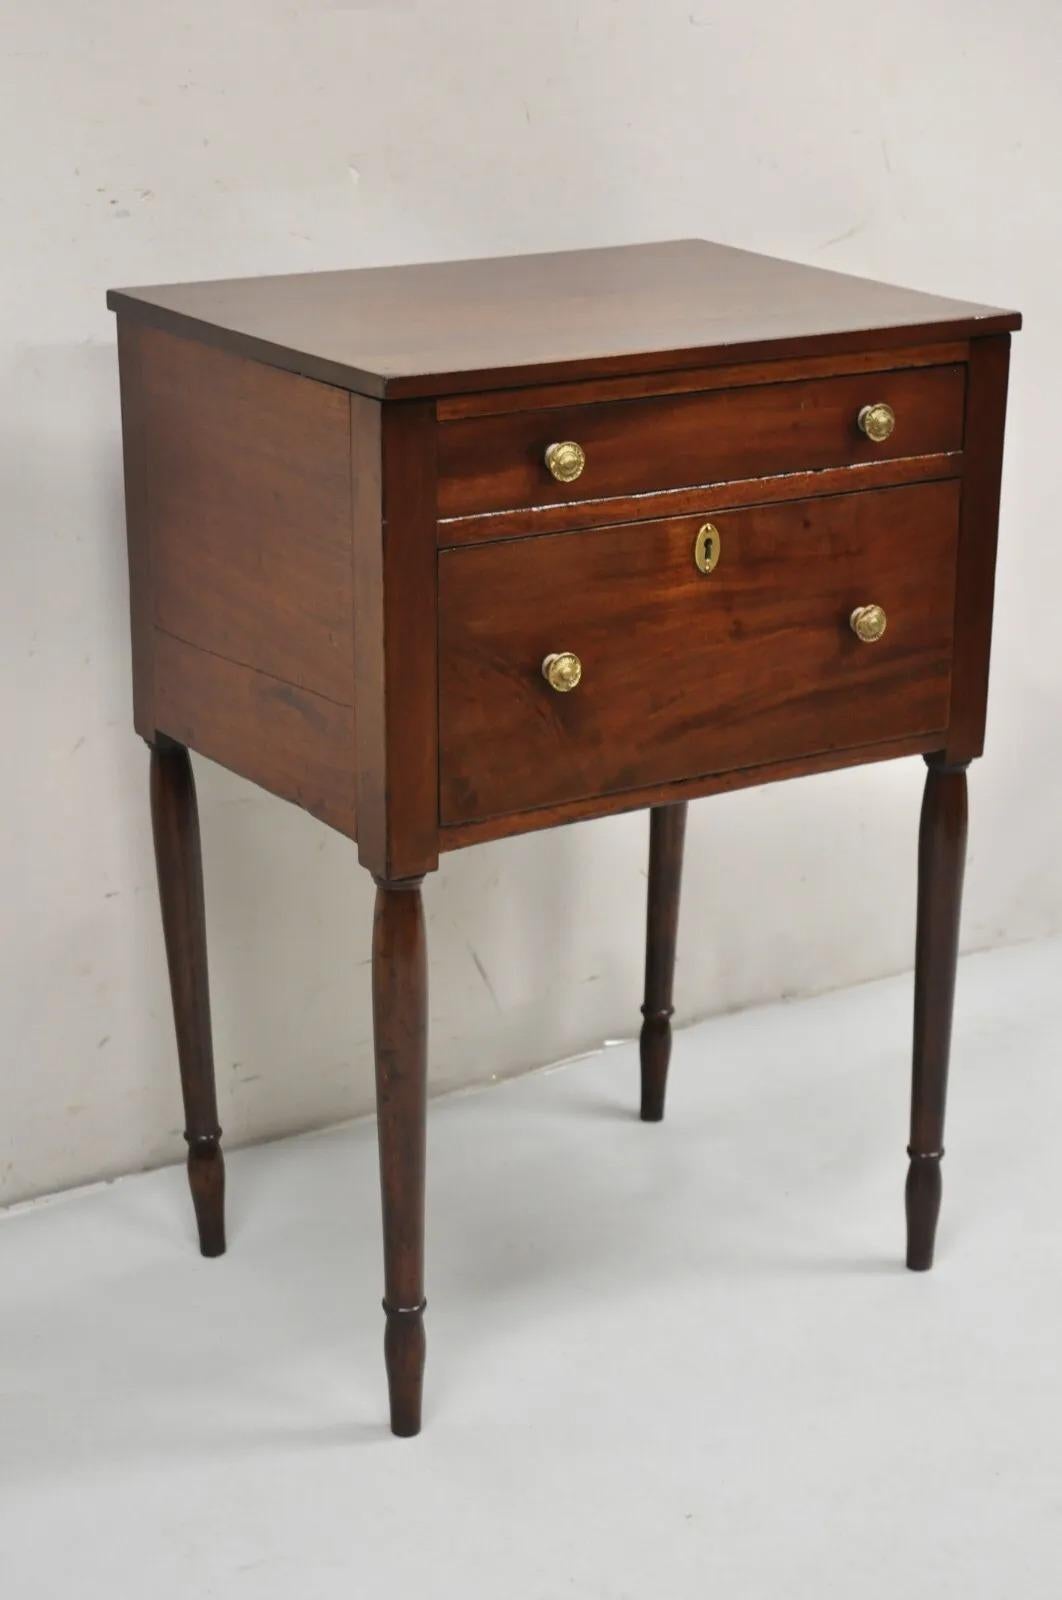 Antique Federal Sheraton Mahogany 2 Drawer Work Stand Side Table Nightstand. Item features 2 dovetail constructed drawers, tapered legs, brass hardware, beautiful wood grain. Circa 19th Century. Measurements: 29.5